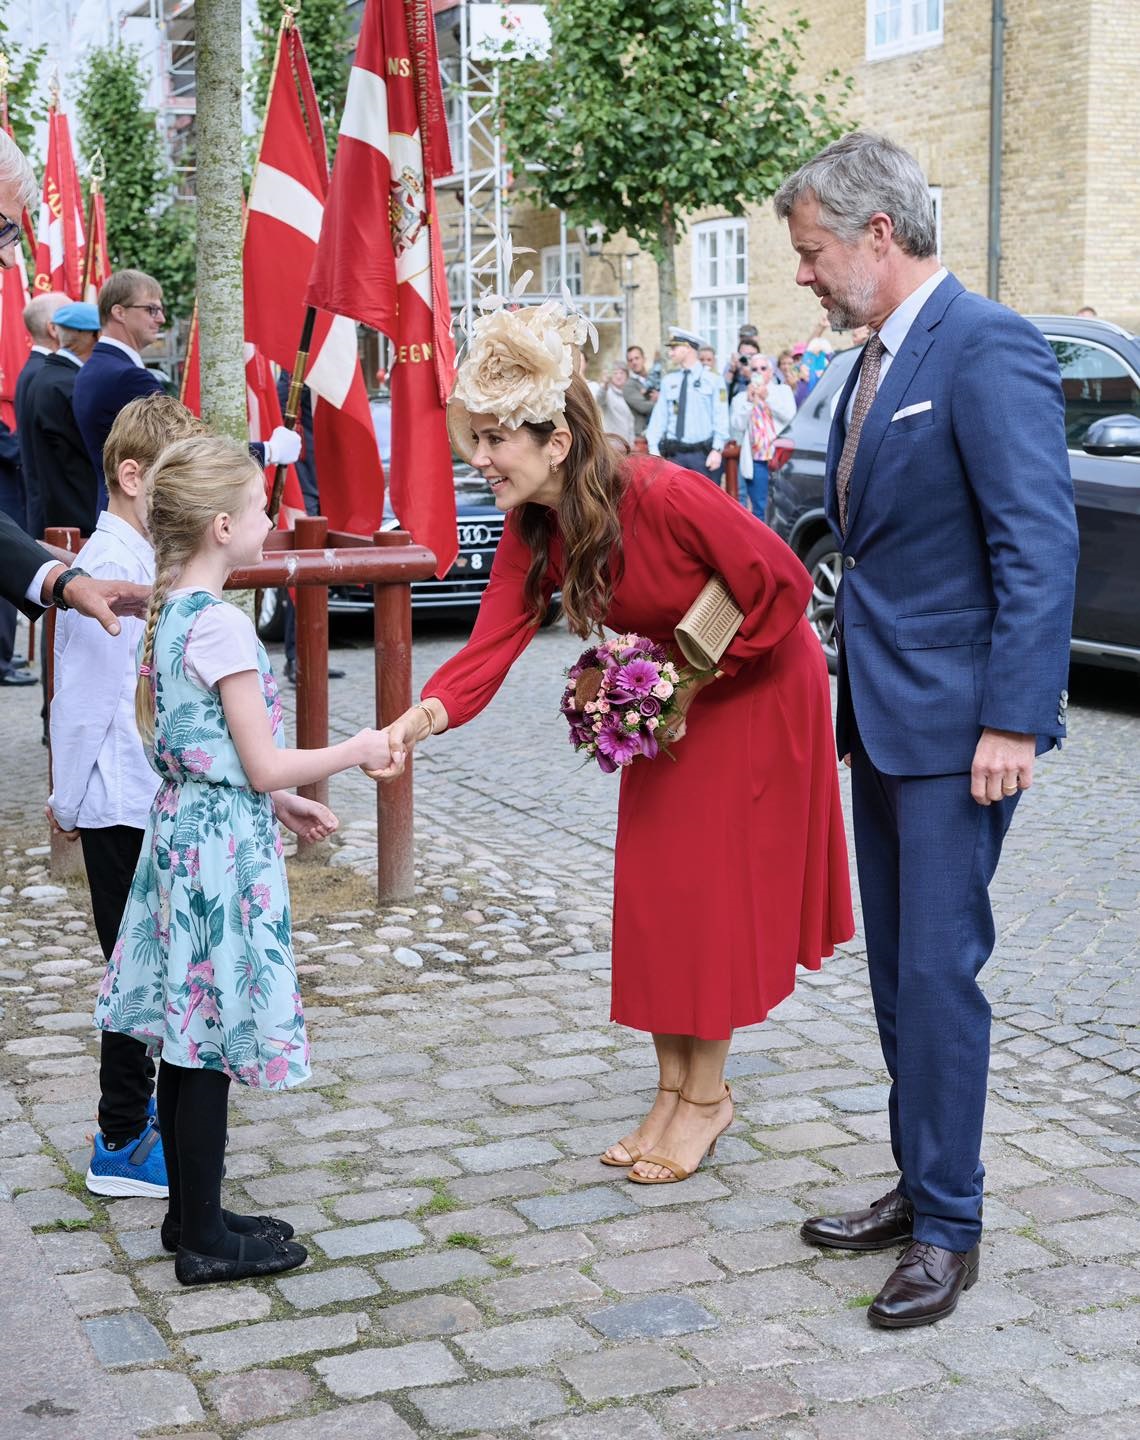 Crown Prince and Princess of Denmark made their first appearance after summer break